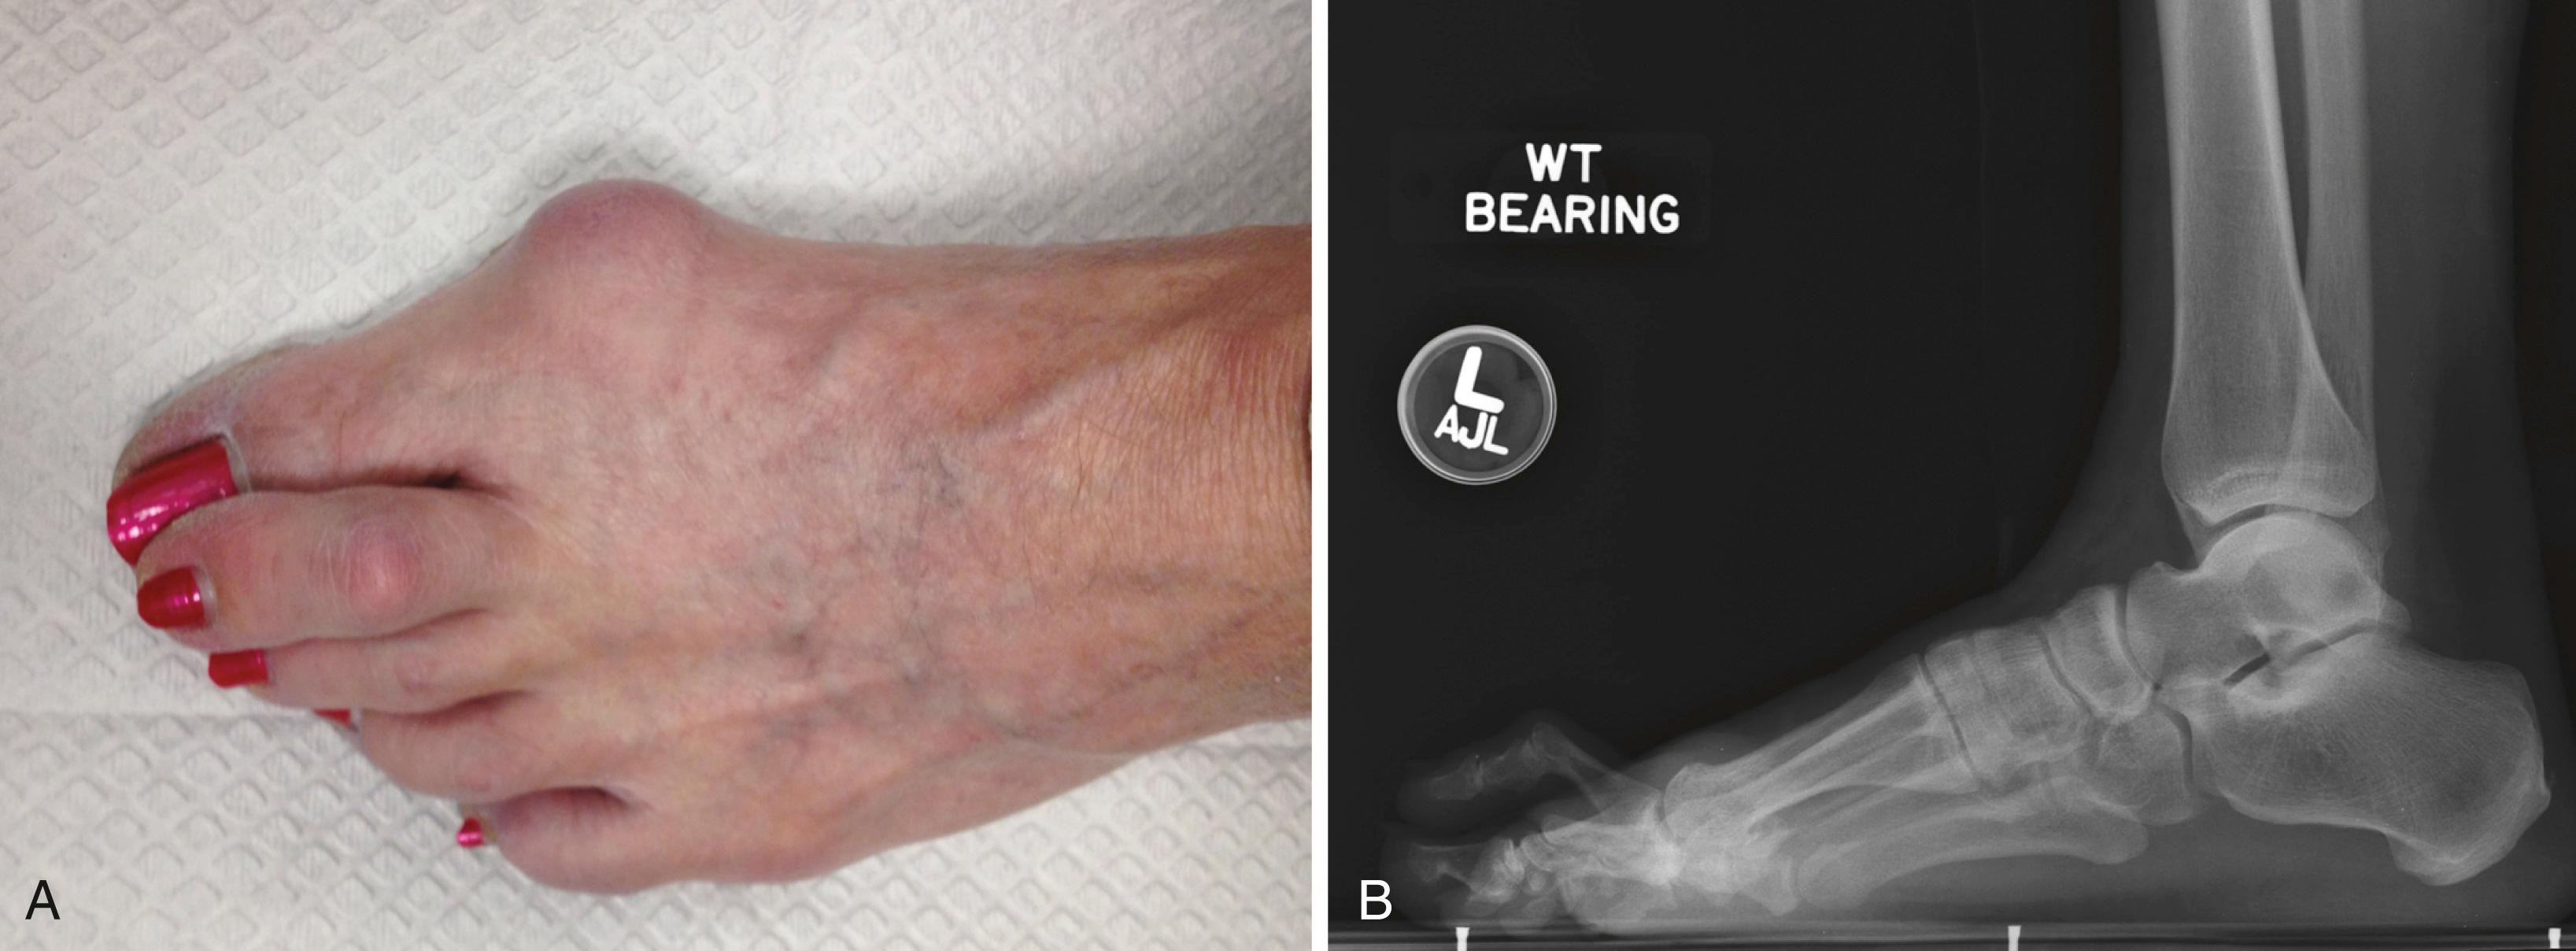 FIGURE 84.5, A and B, Effusion in joint of patient with hammer toe deformity.